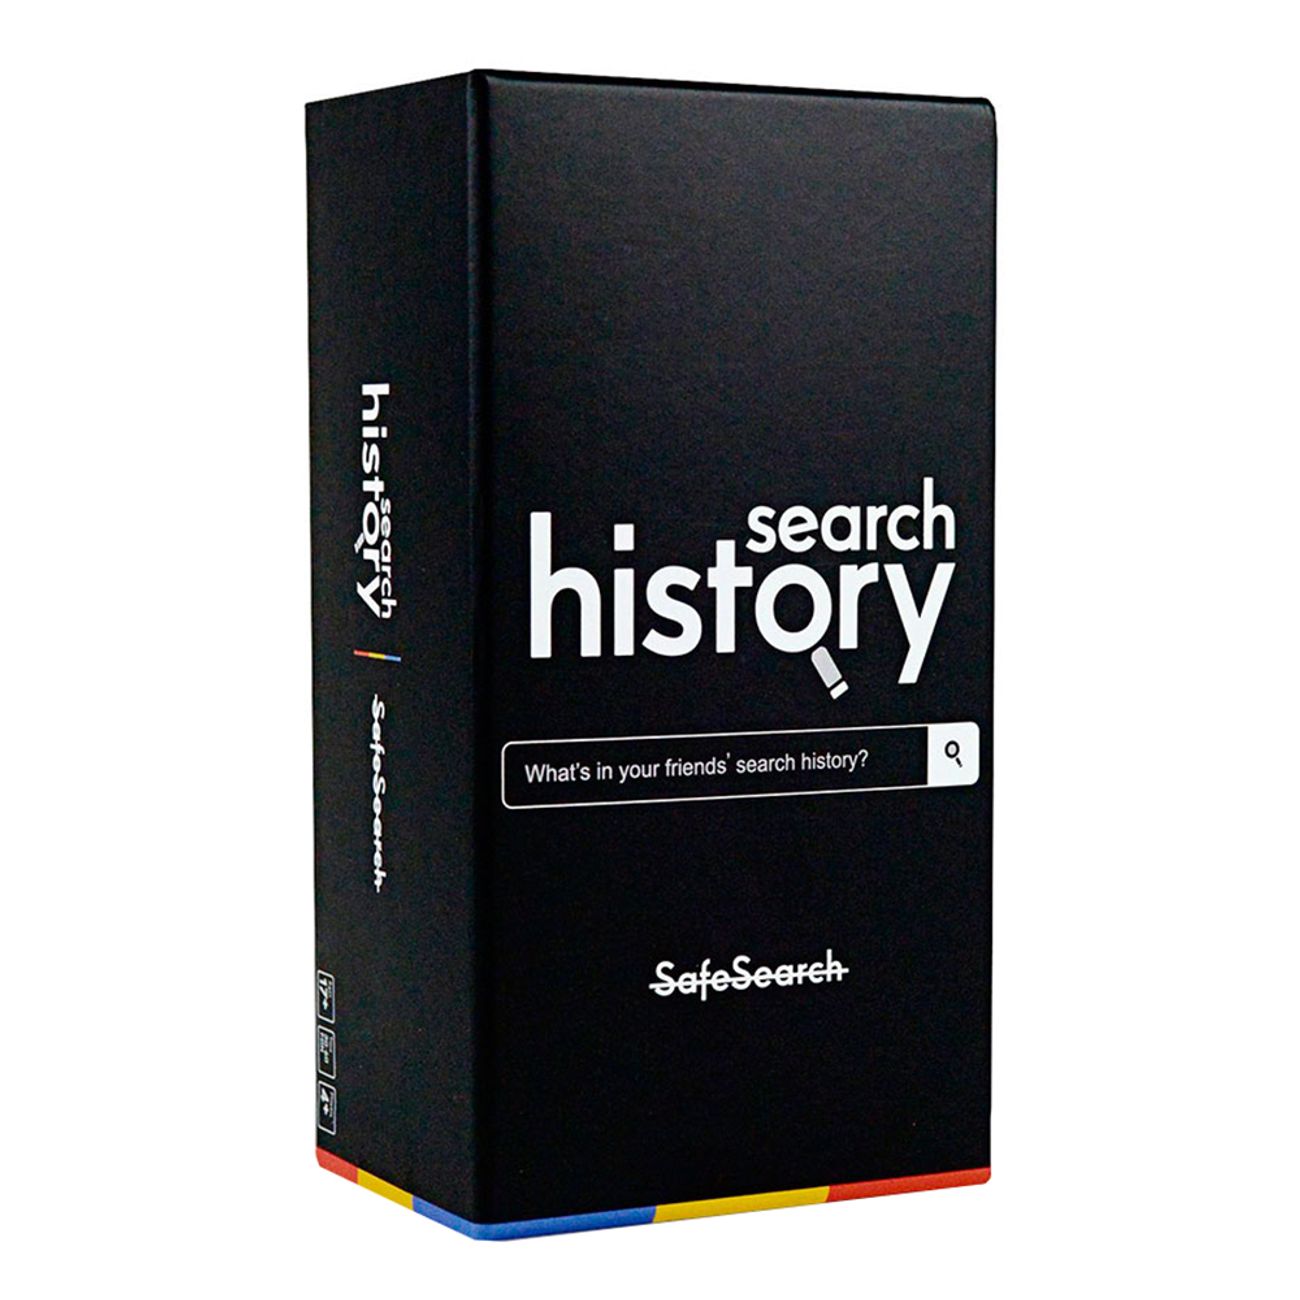 search-history-safesearch-spel-1